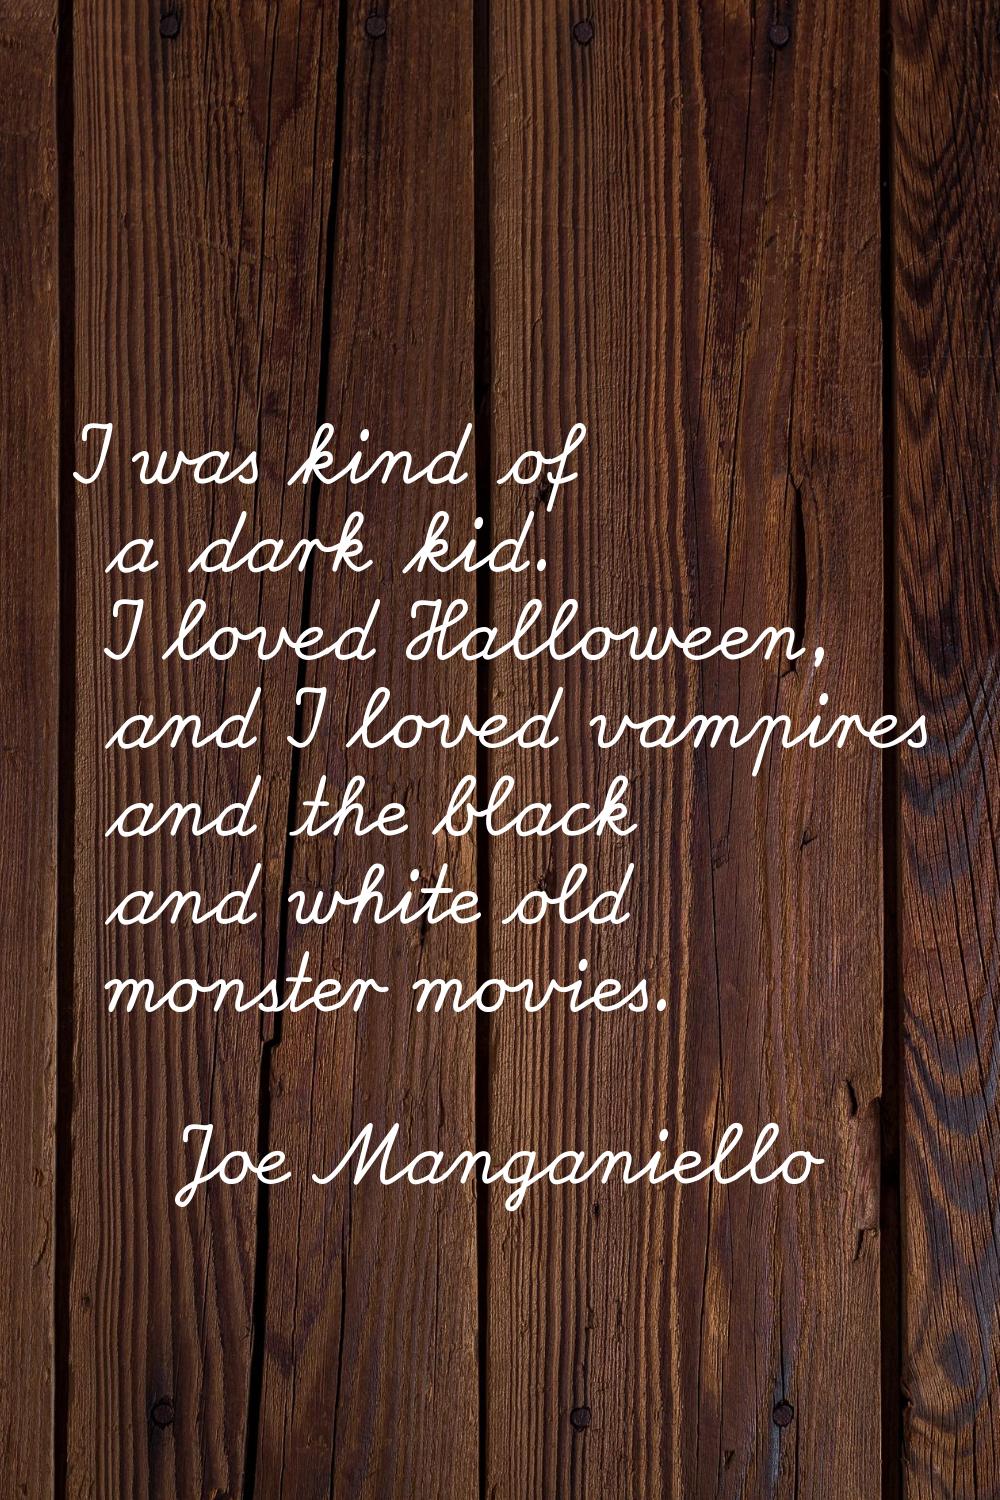 I was kind of a dark kid. I loved Halloween, and I loved vampires and the black and white old monst